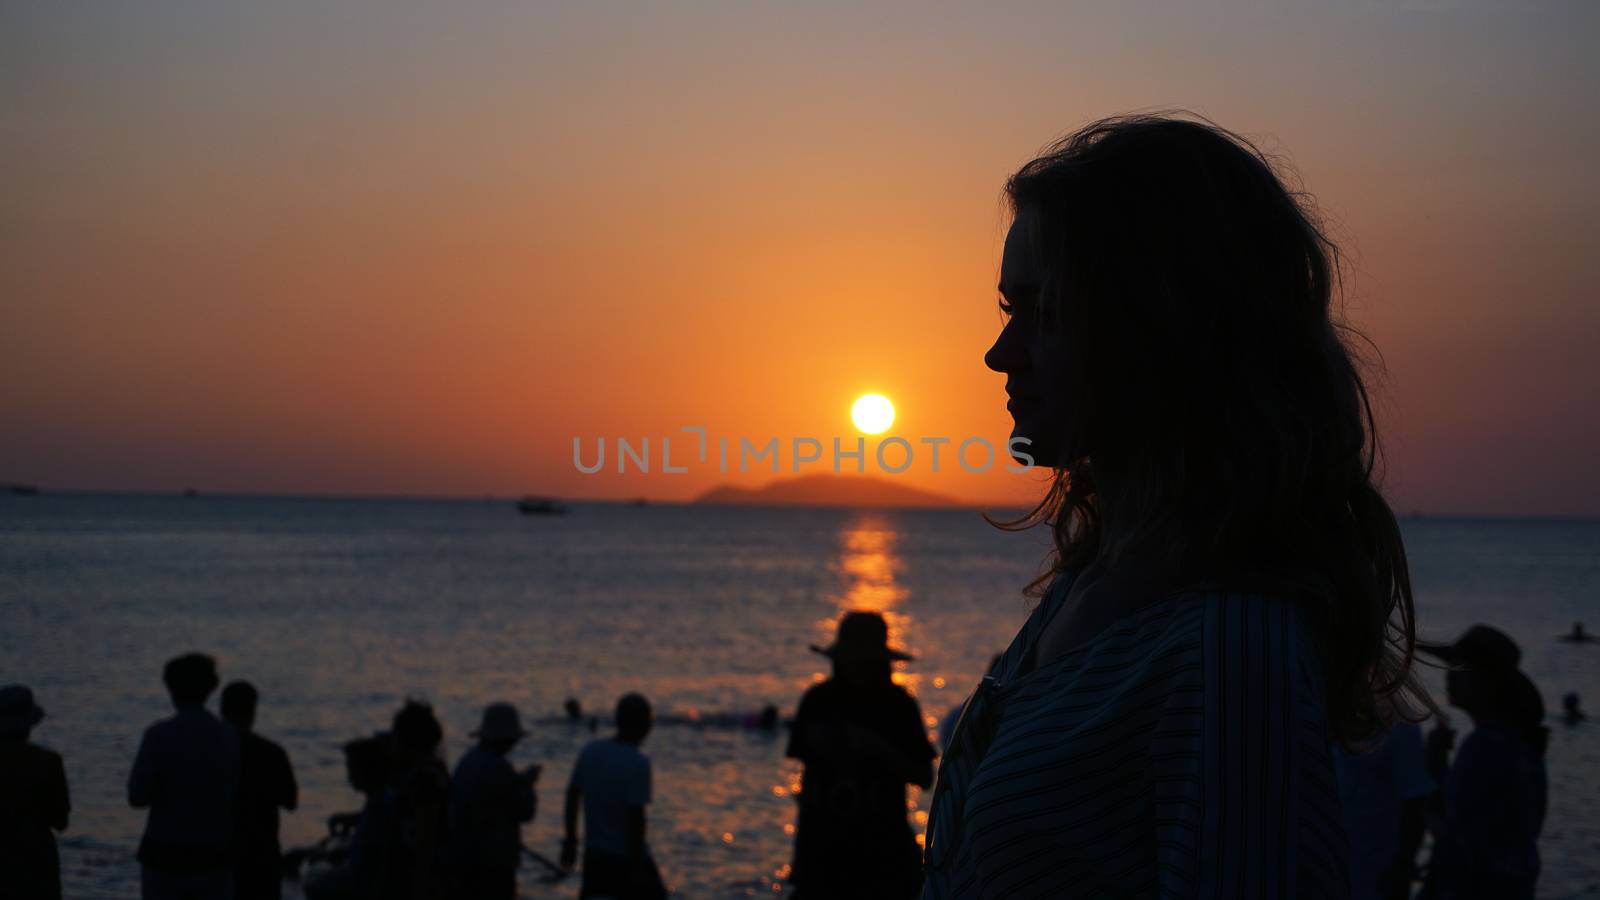 Side view of back light of a woman silhouette warm sunset in front of sun - tourist beach at sunset